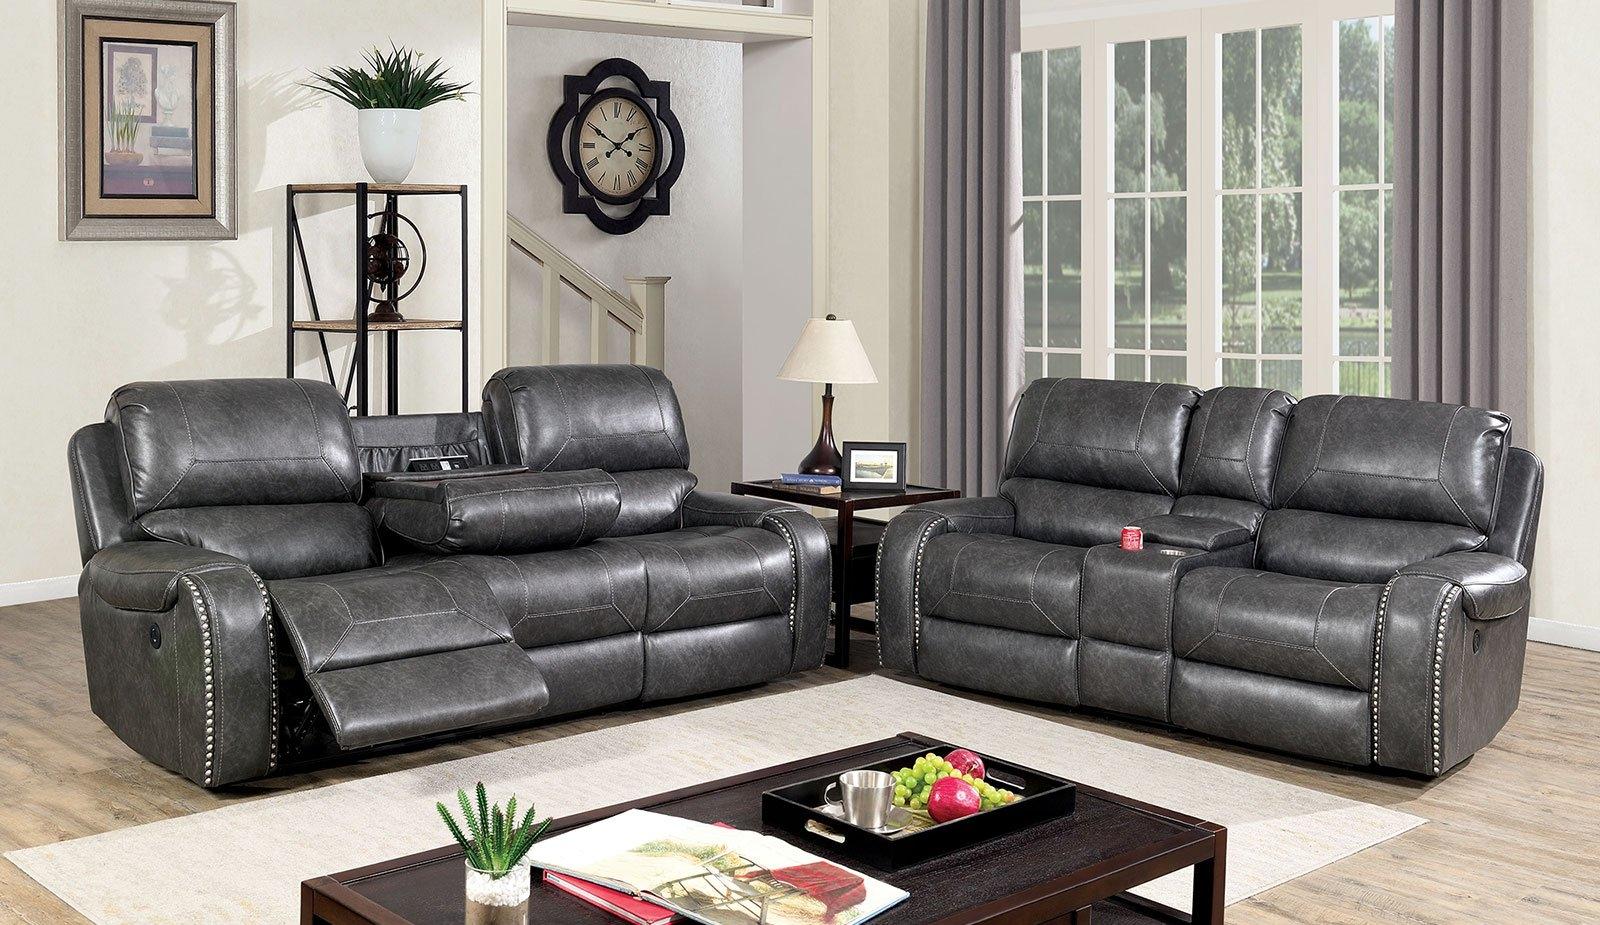 Transitional Power Sofa Loveseat and Recliner CM6950GY-3CP Walter CM6950GY-3CP in Gray Leatherette